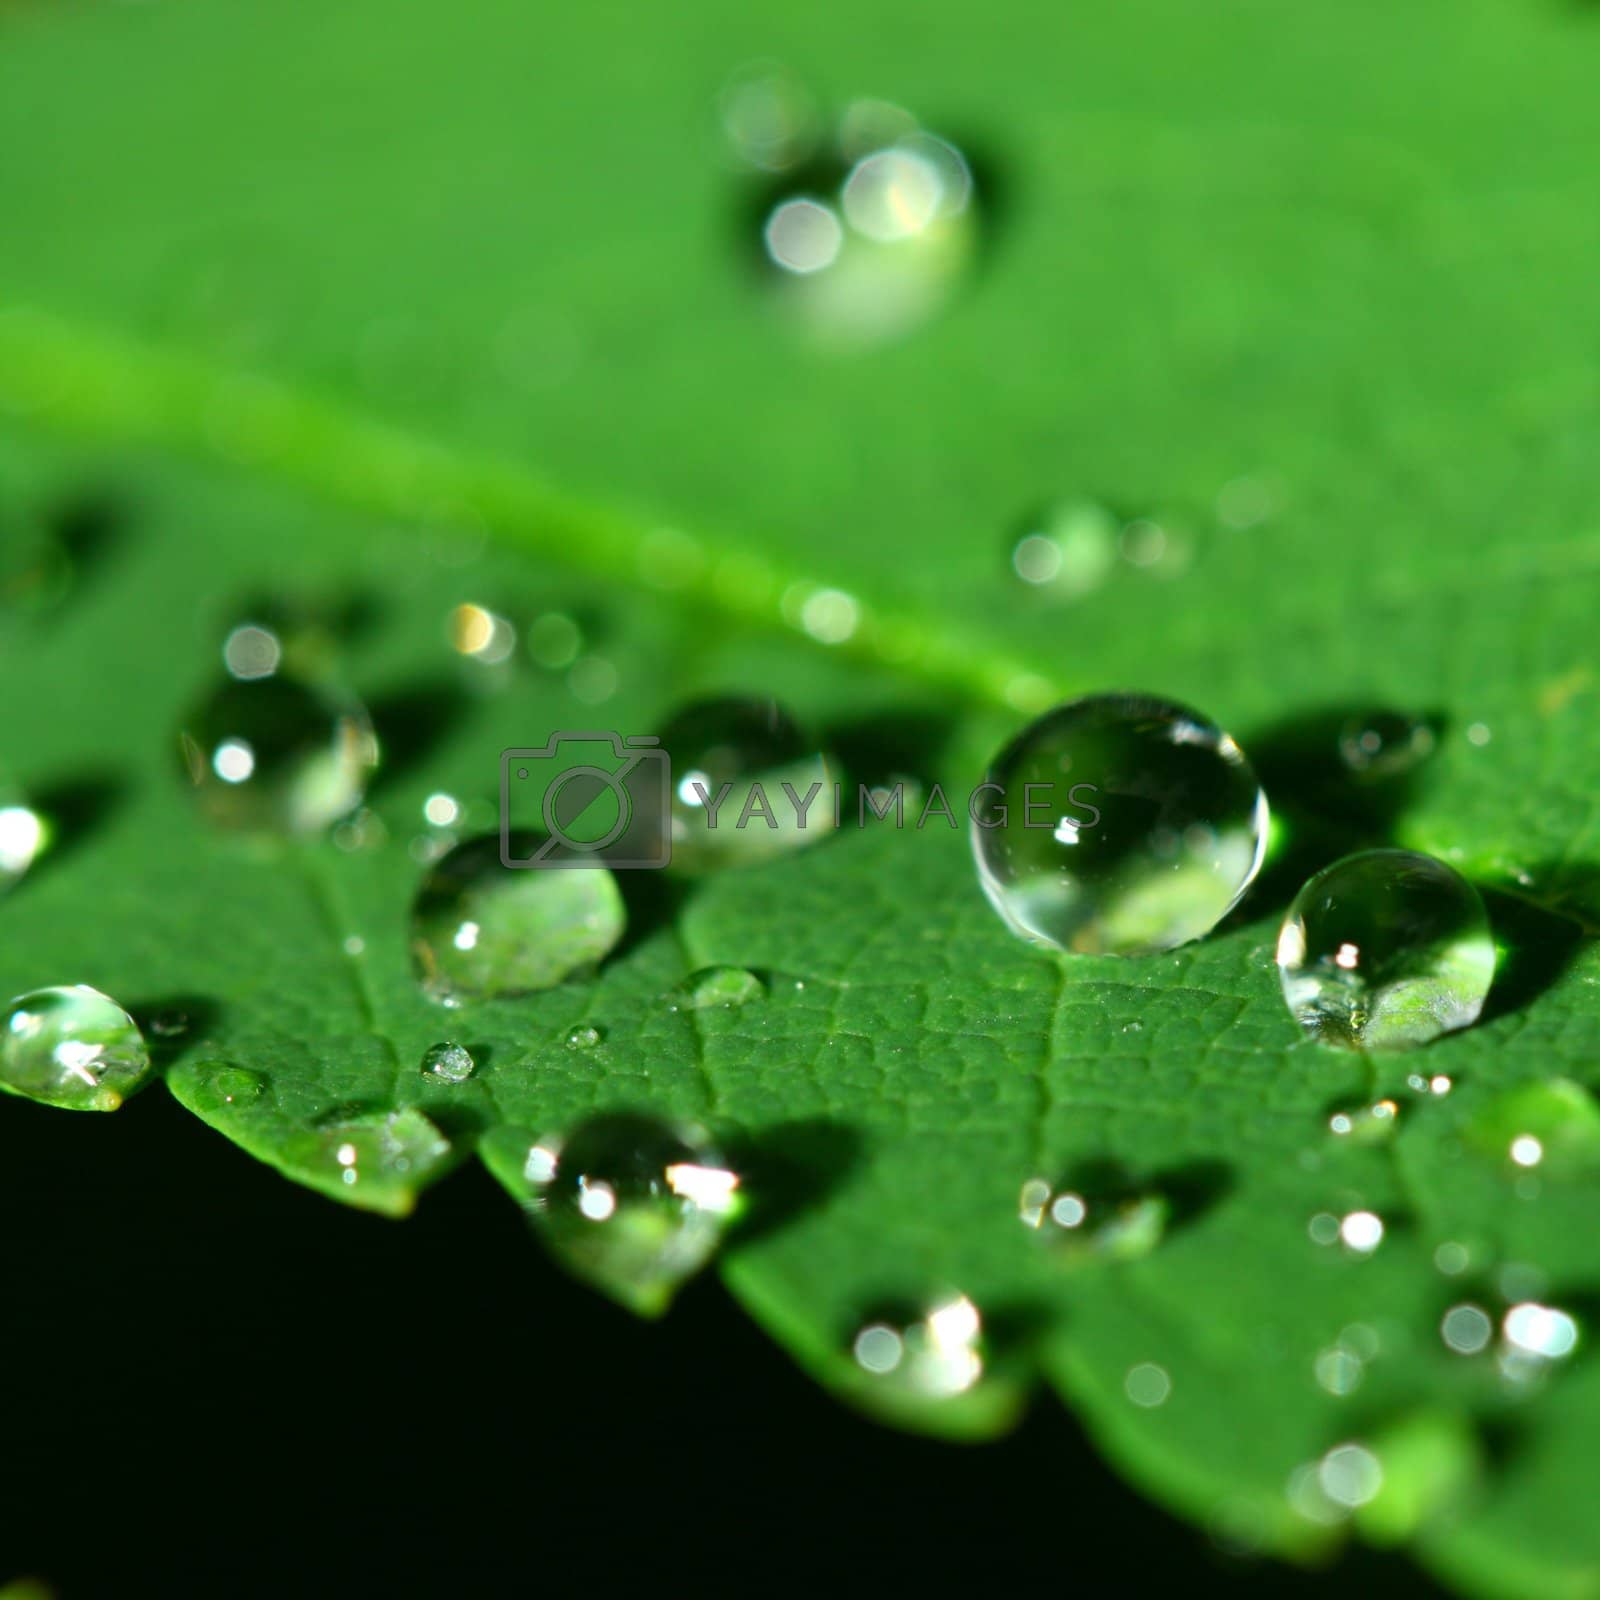 Royalty free image of natural waterdrop by Yellowj